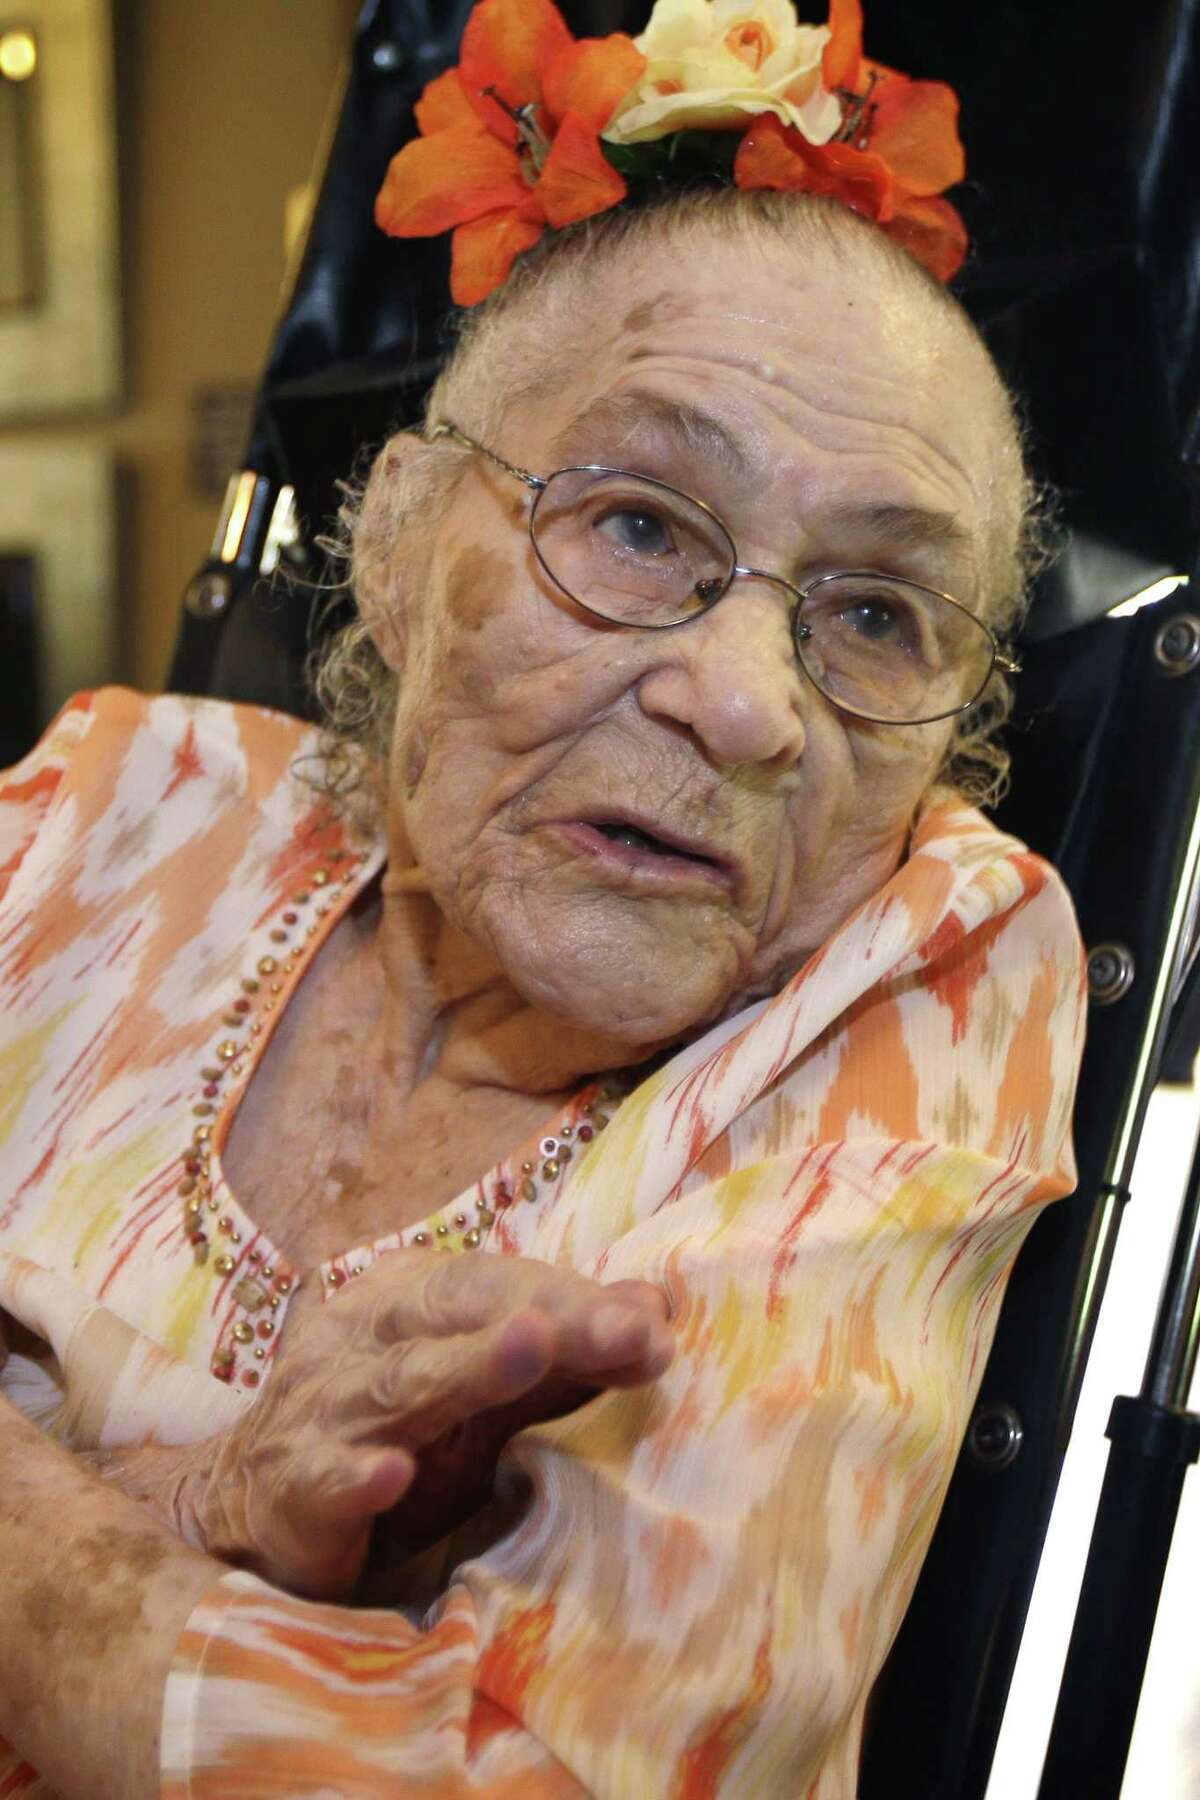 In this July 3, 2014, file photo, Gertrude Weaver poses at Silver Oaks Health and Rehabilitation Center in Camden, Ark., a day before her 116th birthday. Just days after becoming the world’s oldest documented person, 116-year-old Gertrude Weaver died Monday in Arkansas.